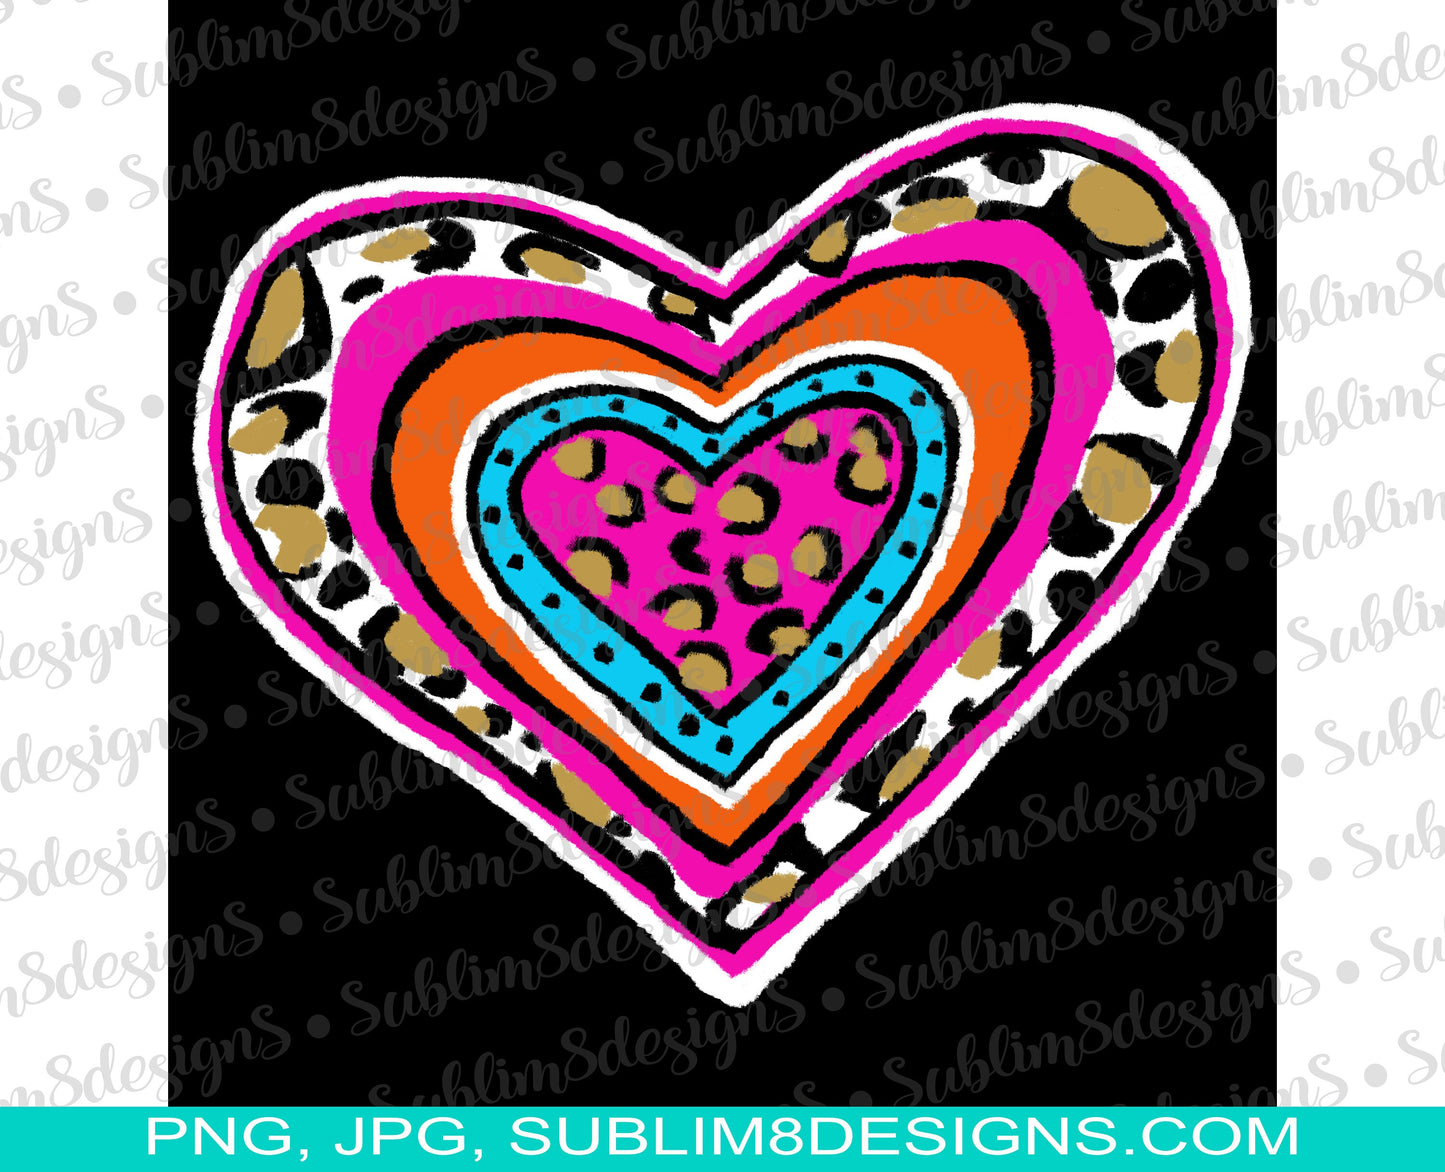 Painted Heart Sublimation Design PNG and JPG ONLY